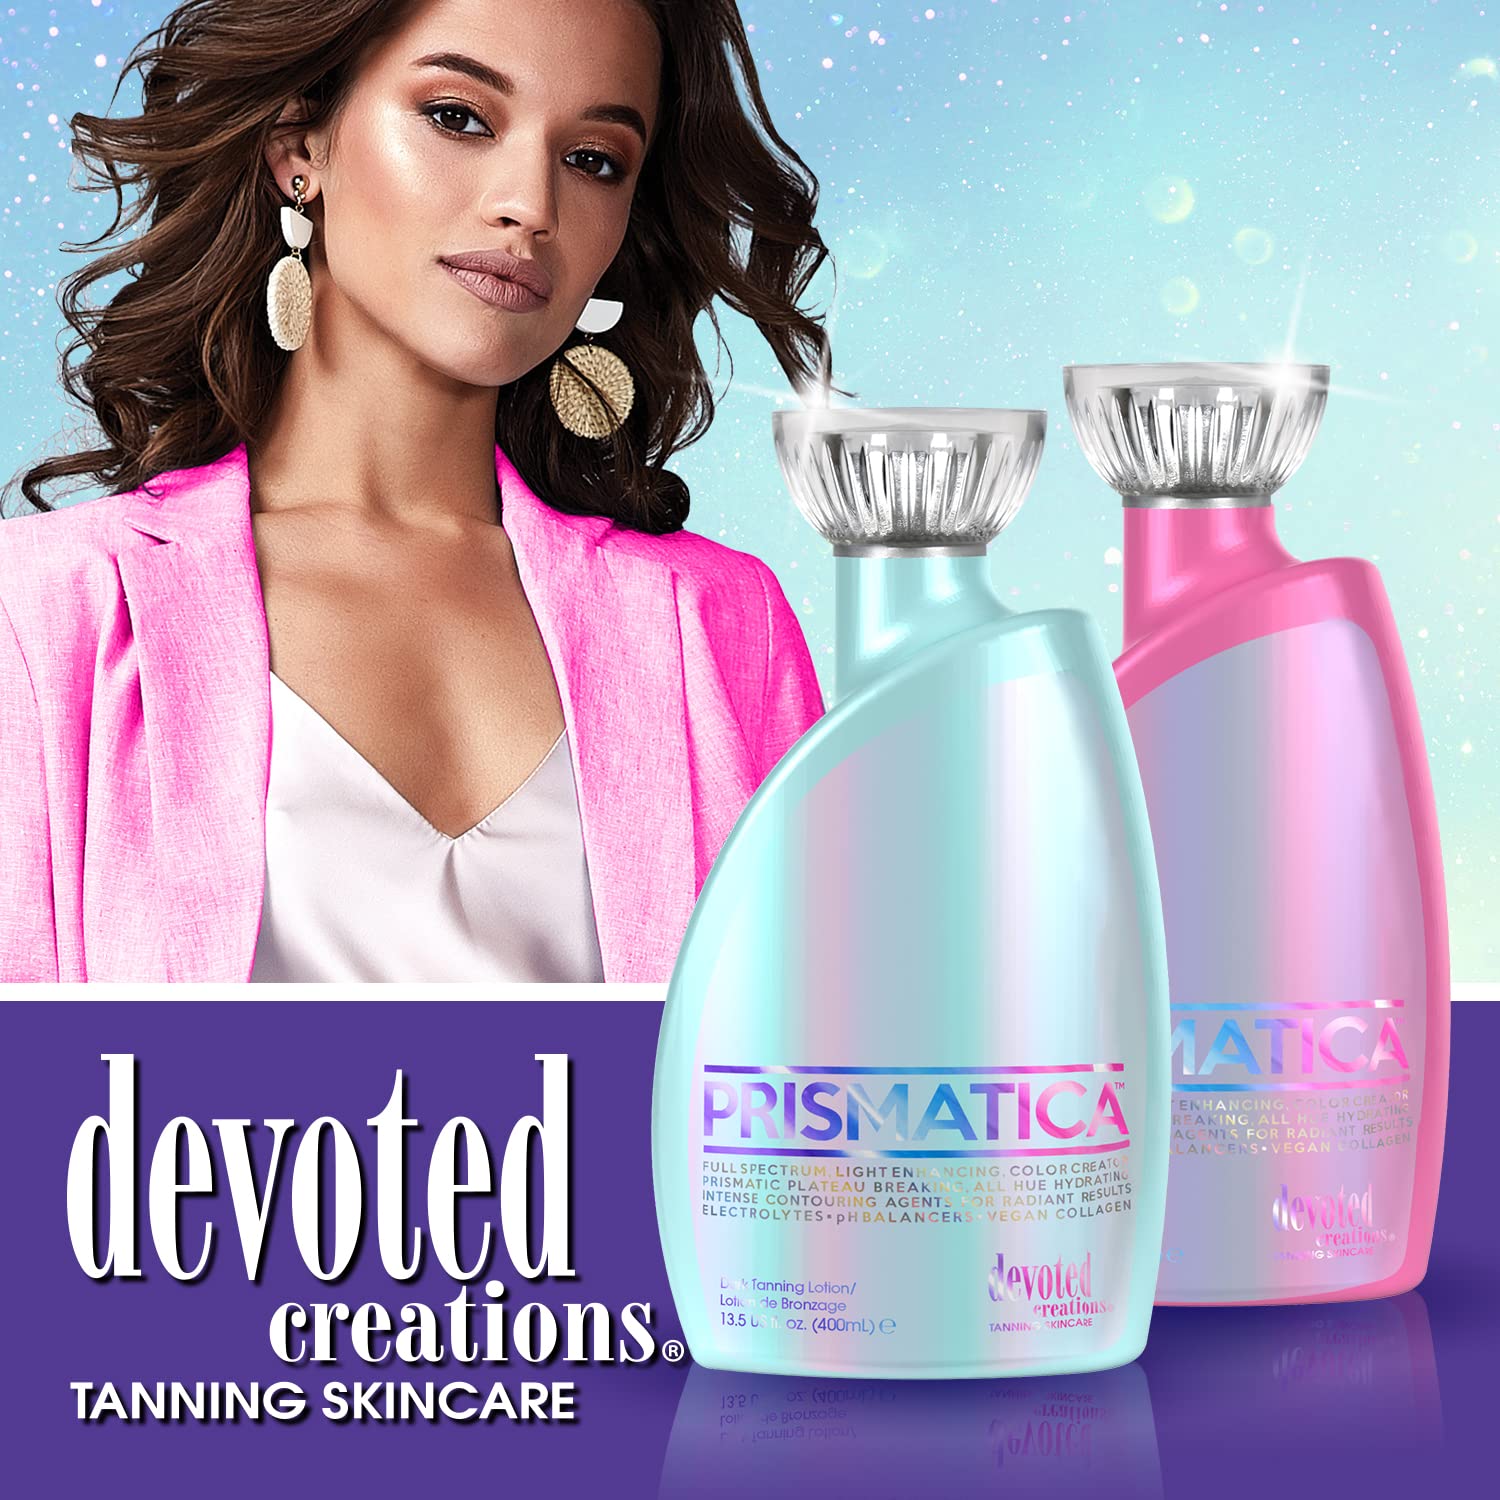 Devoted Creations Prismatica - Blue Hued Dark Tanning Optimizer with Sugarcane Derived Squalane, Vegan Collagen, Light Activated Photosomes, Anti-Orange Technology, Tattoo & Color Fade Protecting - Use with Blue Light, Red Light, and UV Light 13.5 oz